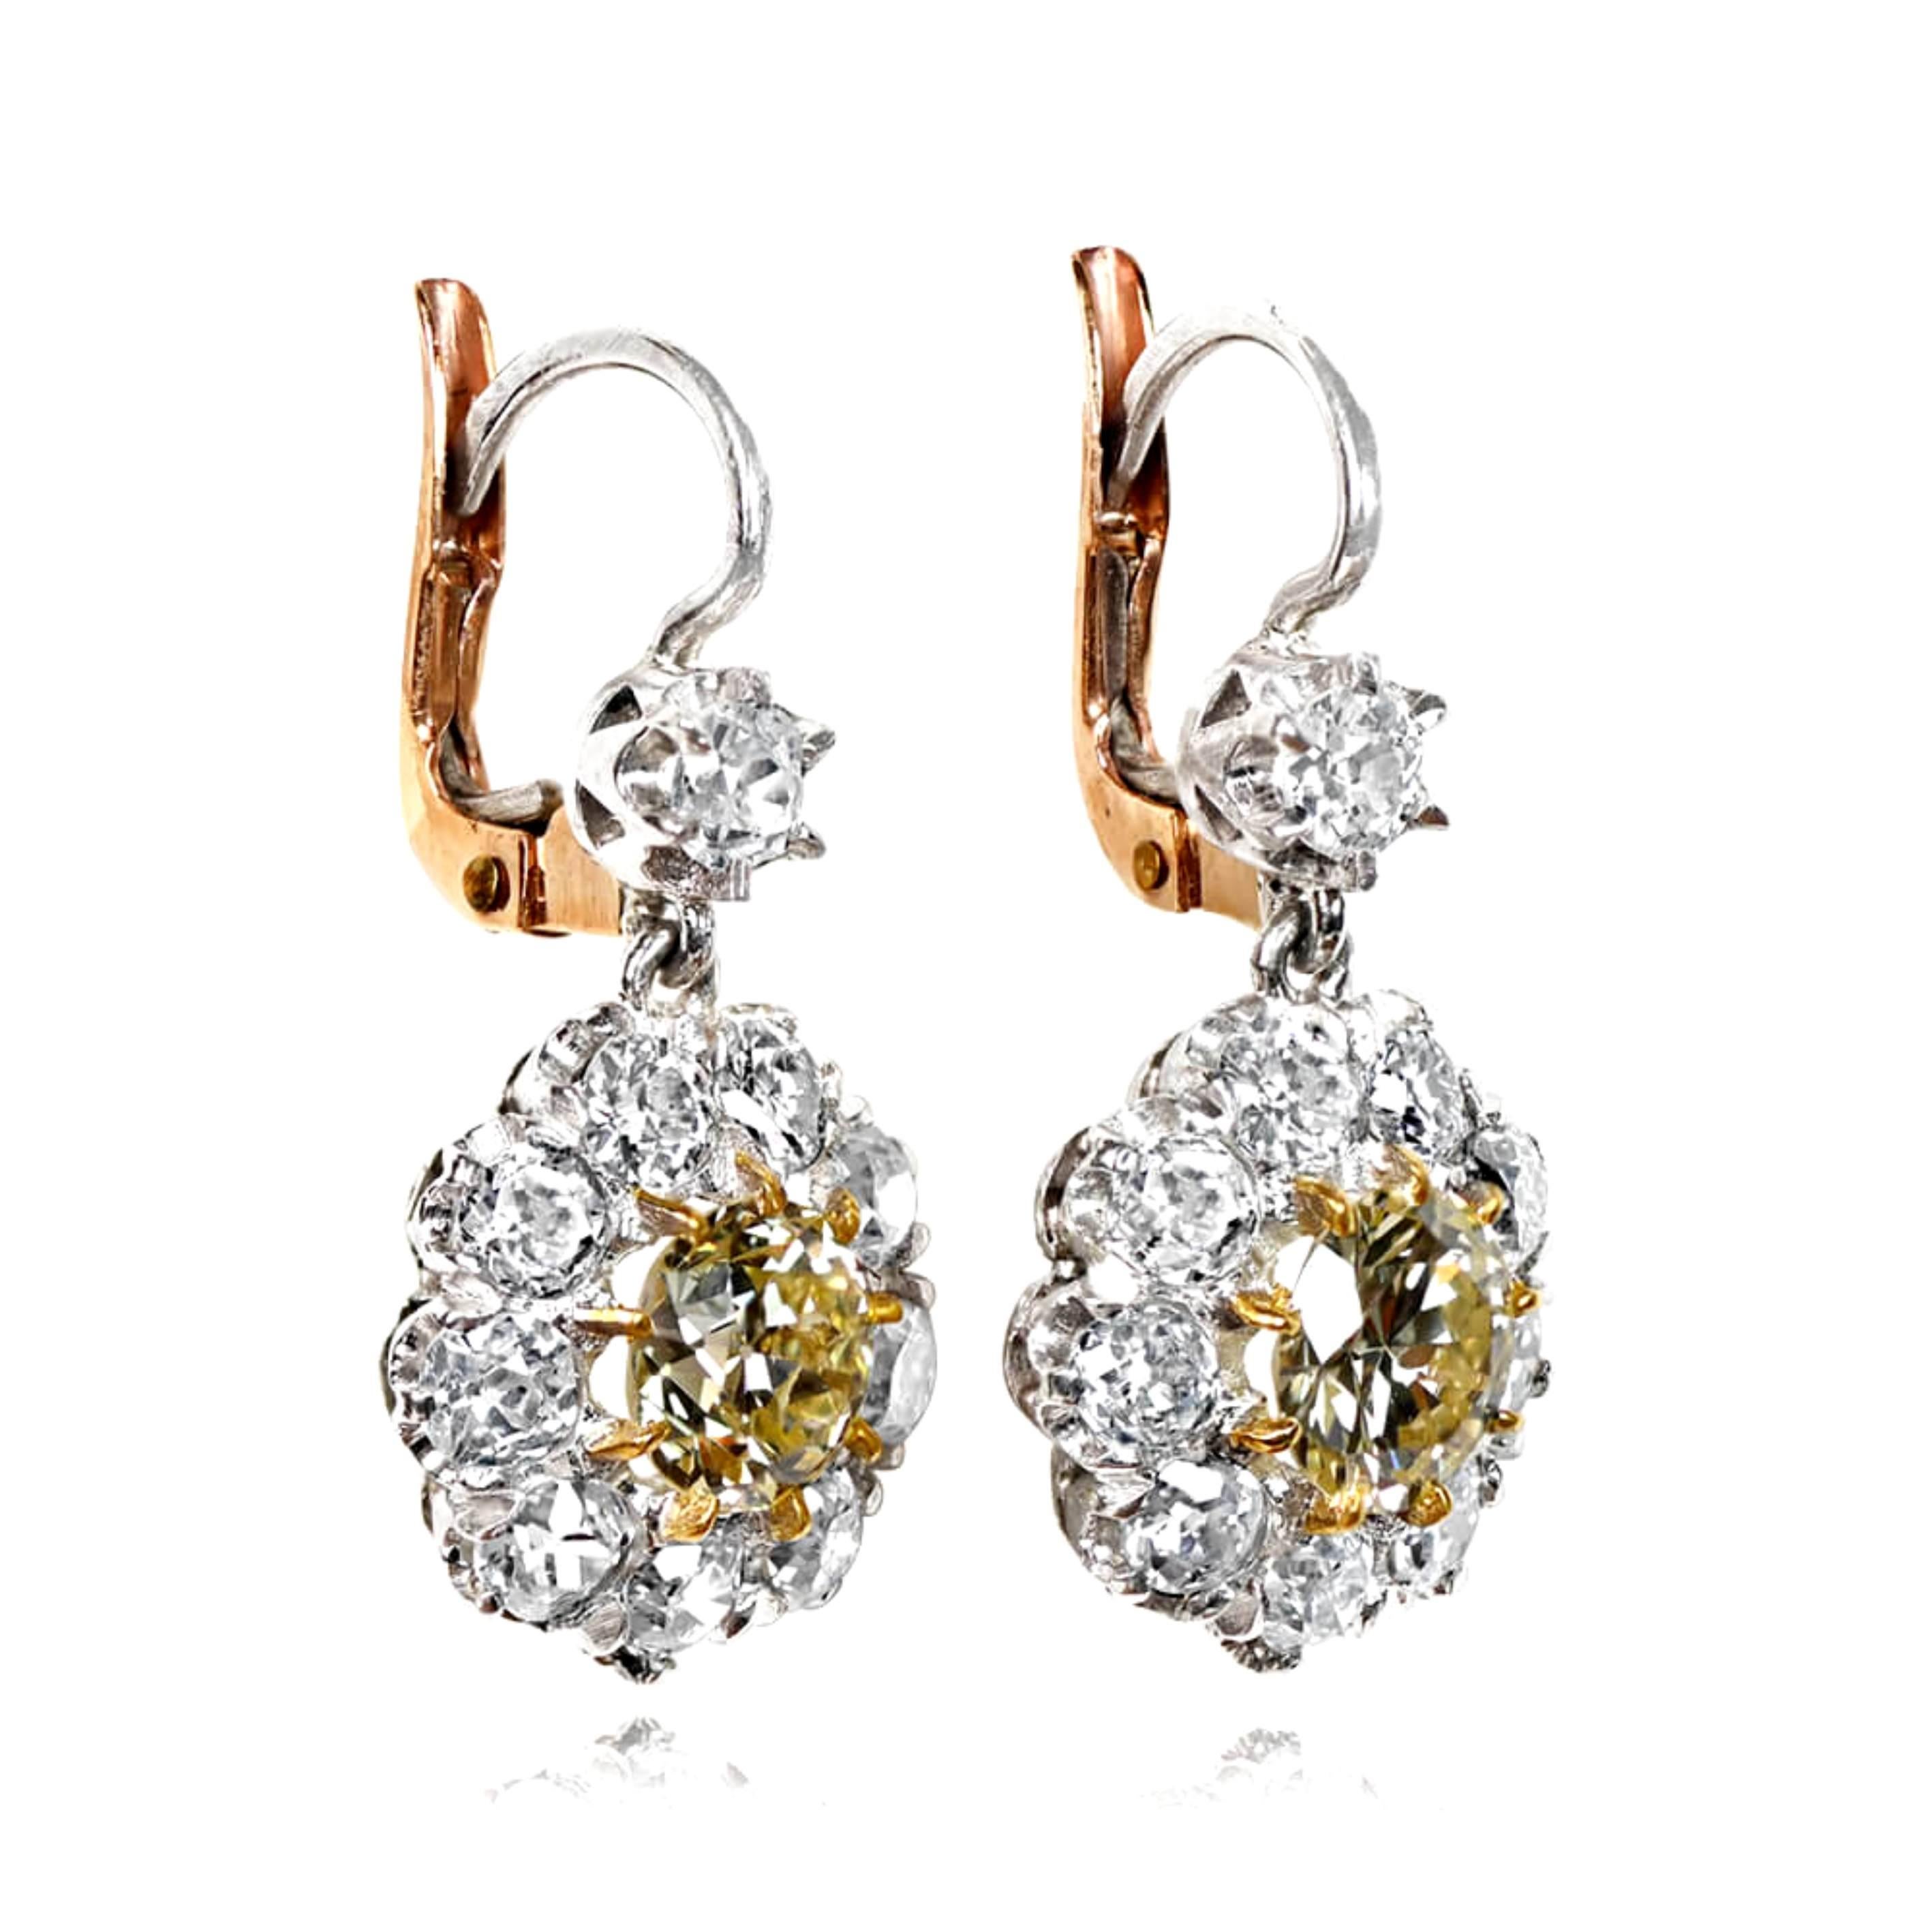 2.70ct Old Euro-Cut Diamond Earrings, VS1 Clarity, Diamond Halo, 18k Yellow Gold In Excellent Condition For Sale In New York, NY